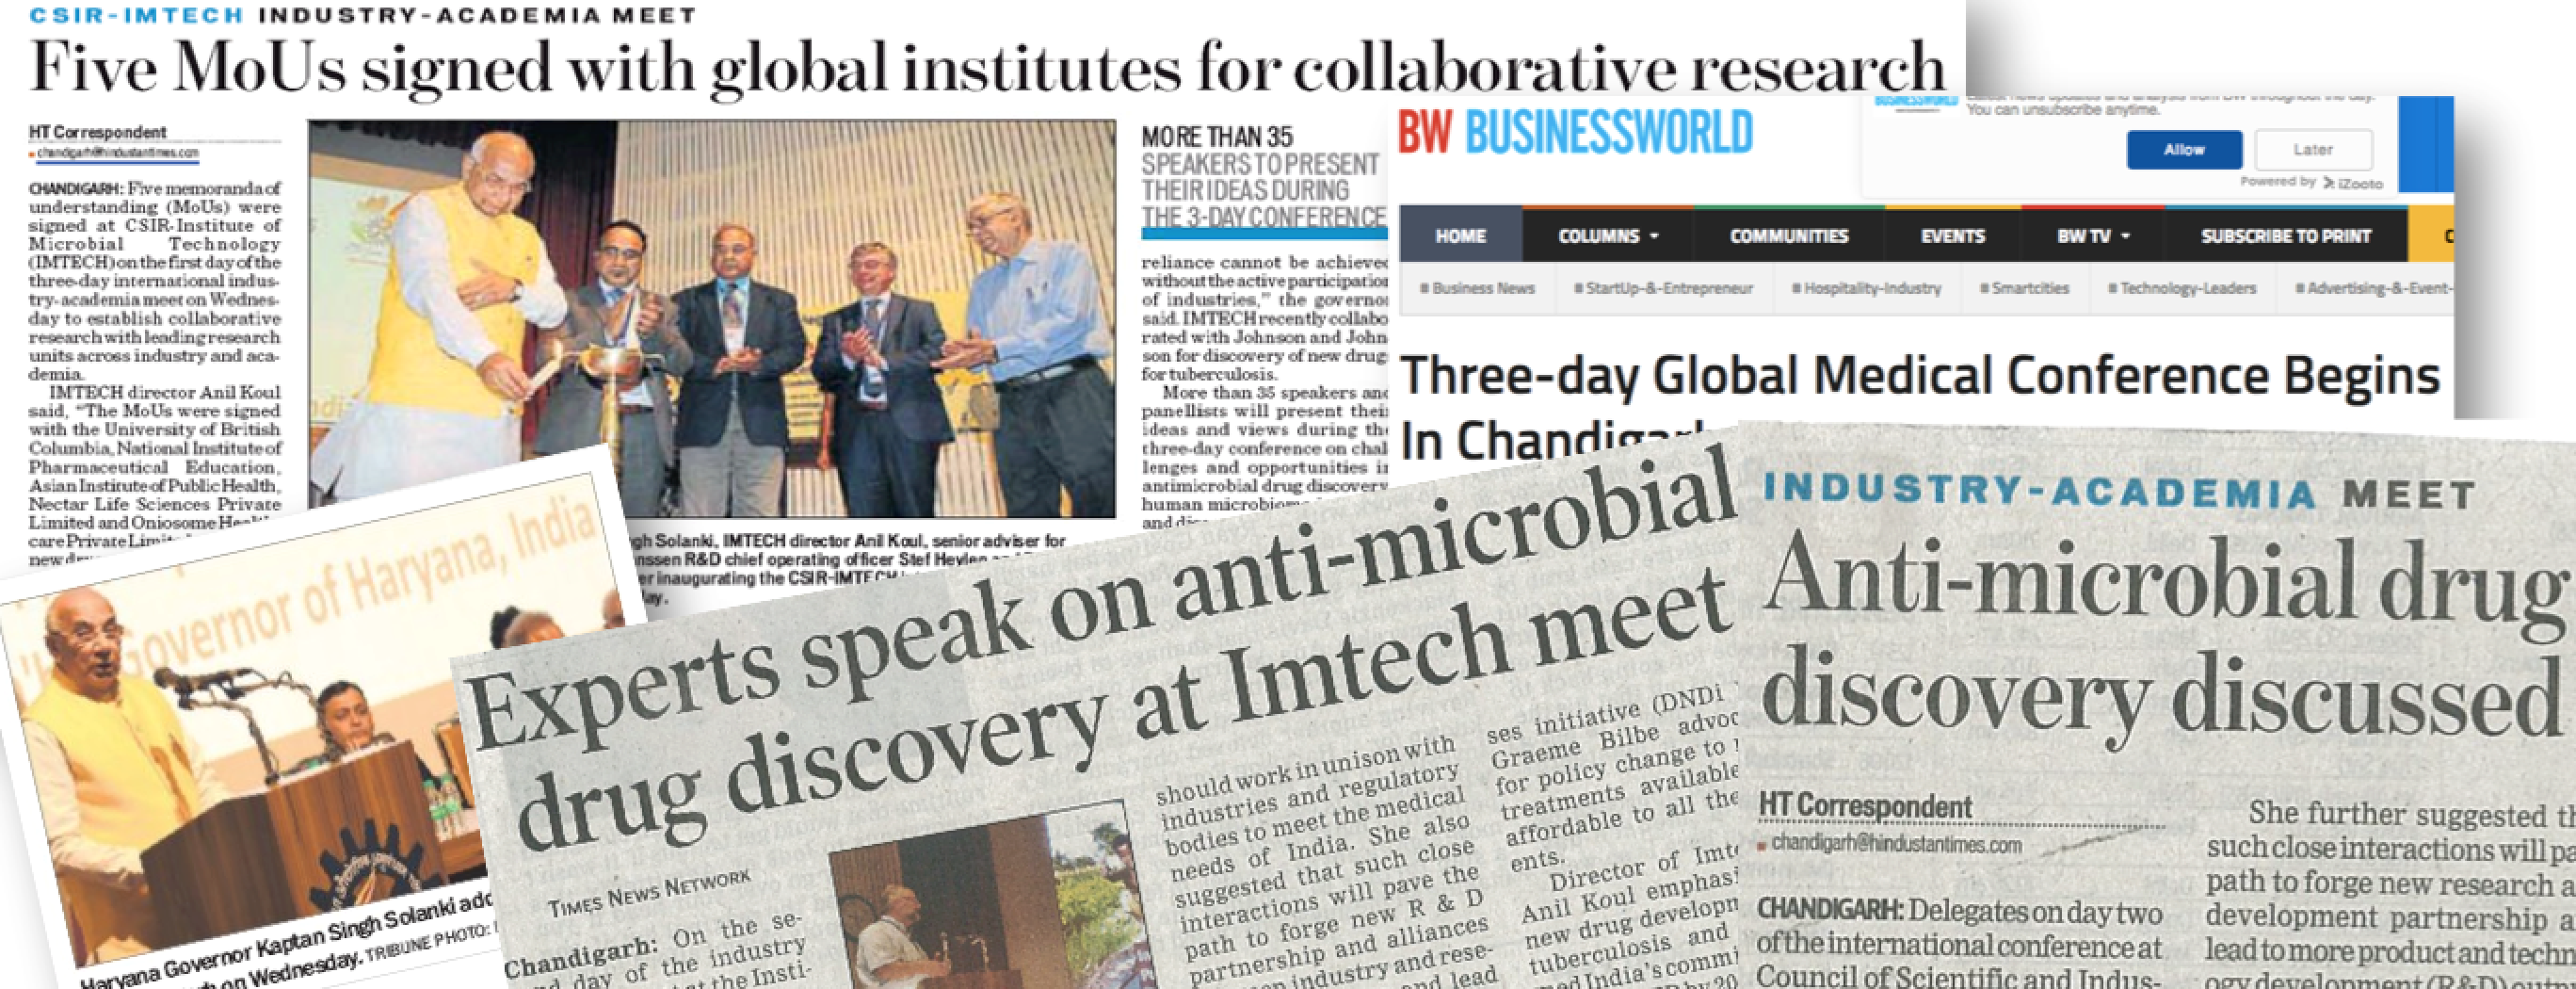 News Coverage during IMTechCon and Industry-Academia Meet at IMTech